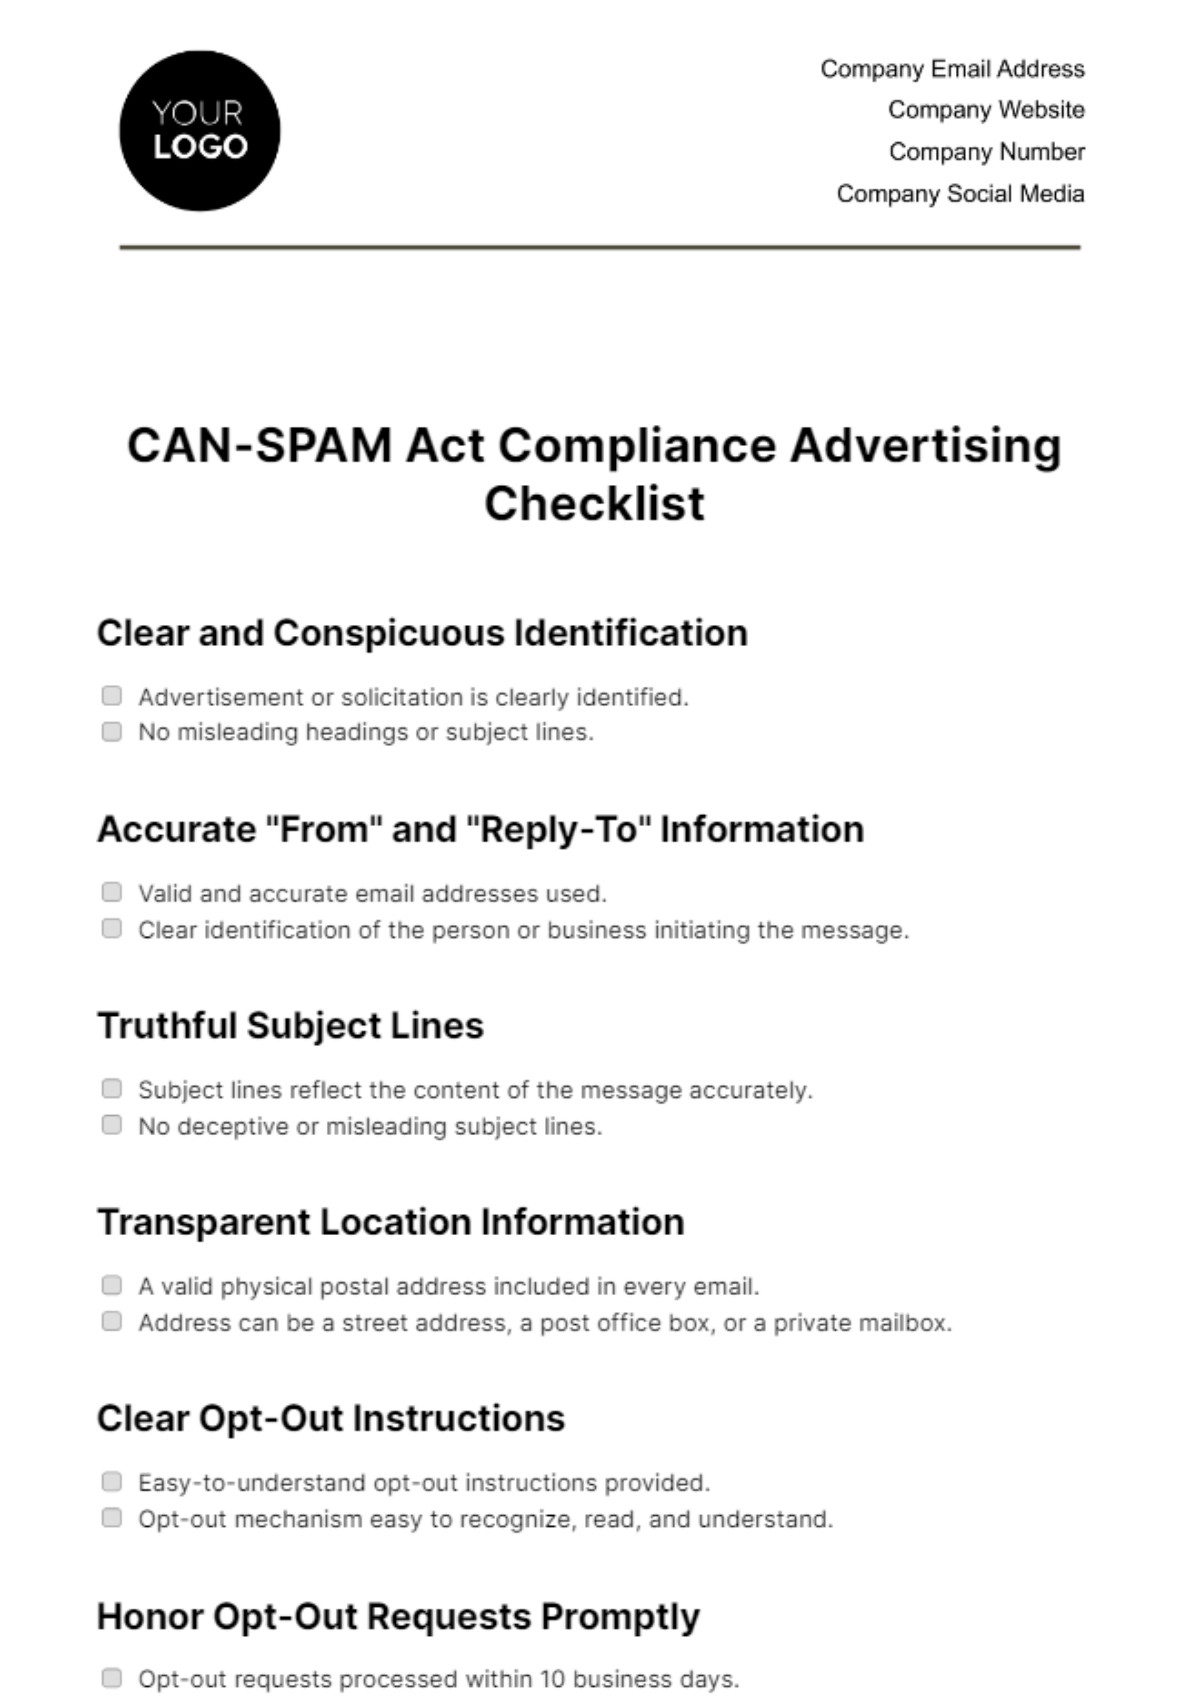 CAN-SPAM Act Compliance Advertising Checklist Template